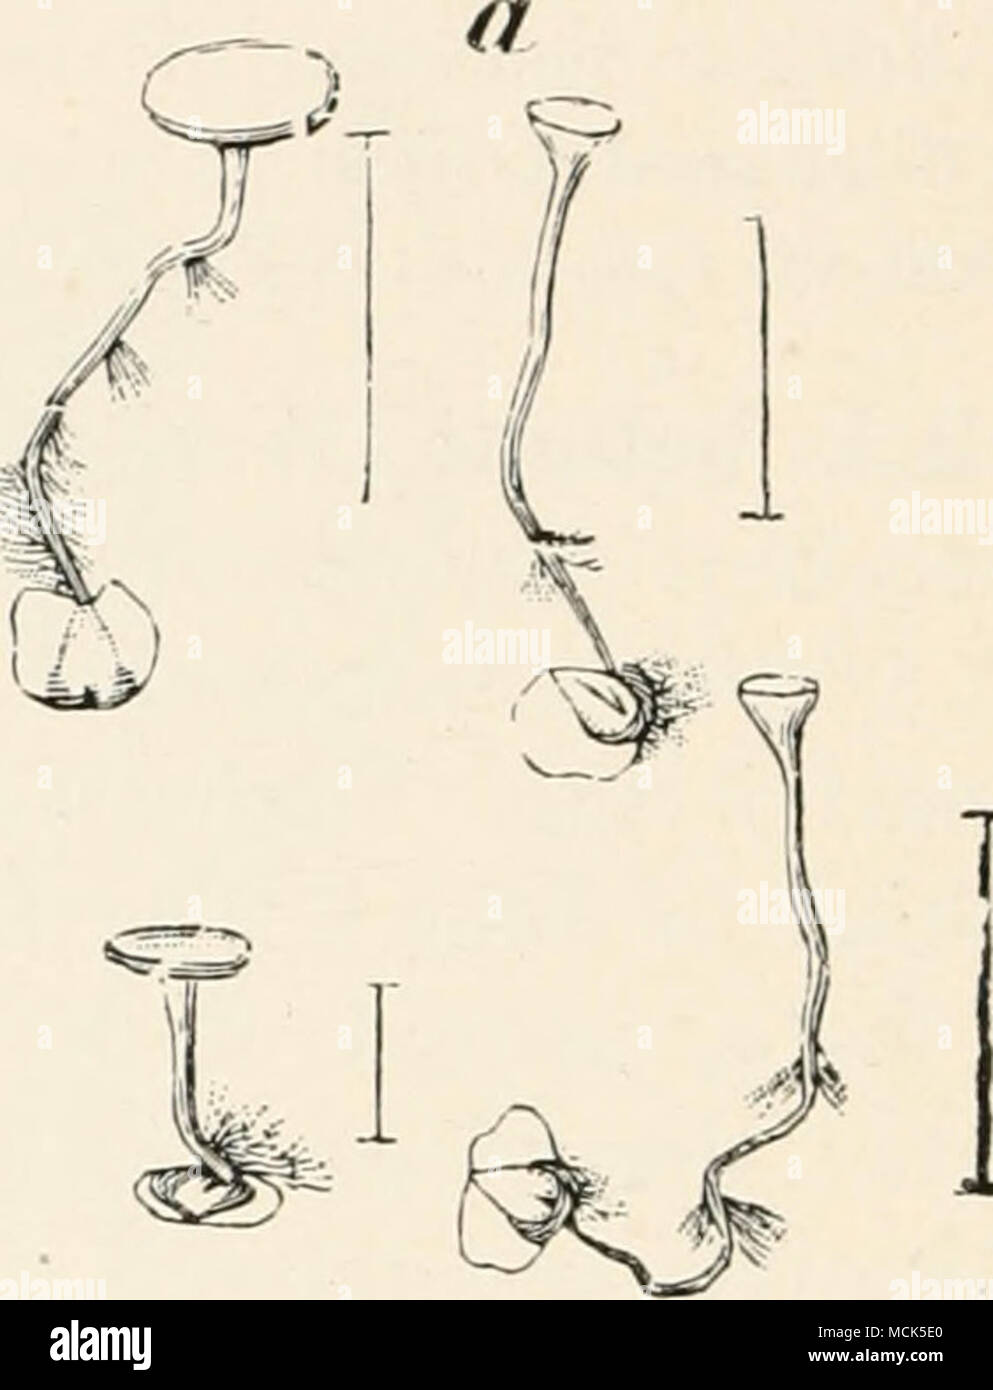 . Fig. 139.—Sclerotinia hetulae. a, Birch fruits with sclerotia, which have germinated and formed cup-hke apothecial discs; rhizoids have developed on the stalks, h, Birch fruit, somewhat enlarged, with semilunar sclerotia. (After Nawaschin.) Hormoviyia hetulae Wtz. often occurs along with the above. It causes the production of thick spherical fruits with little or no wing. Sclerotinia aelnsta Karst. has also been found on birch leaves in Finland. Scl. alni Naw. Woronin found this first on catkins of Alnus ineana. Nawaschin has more recently investigated it.^ Scl. rhododendri Fischer.- This wa Stock Photo